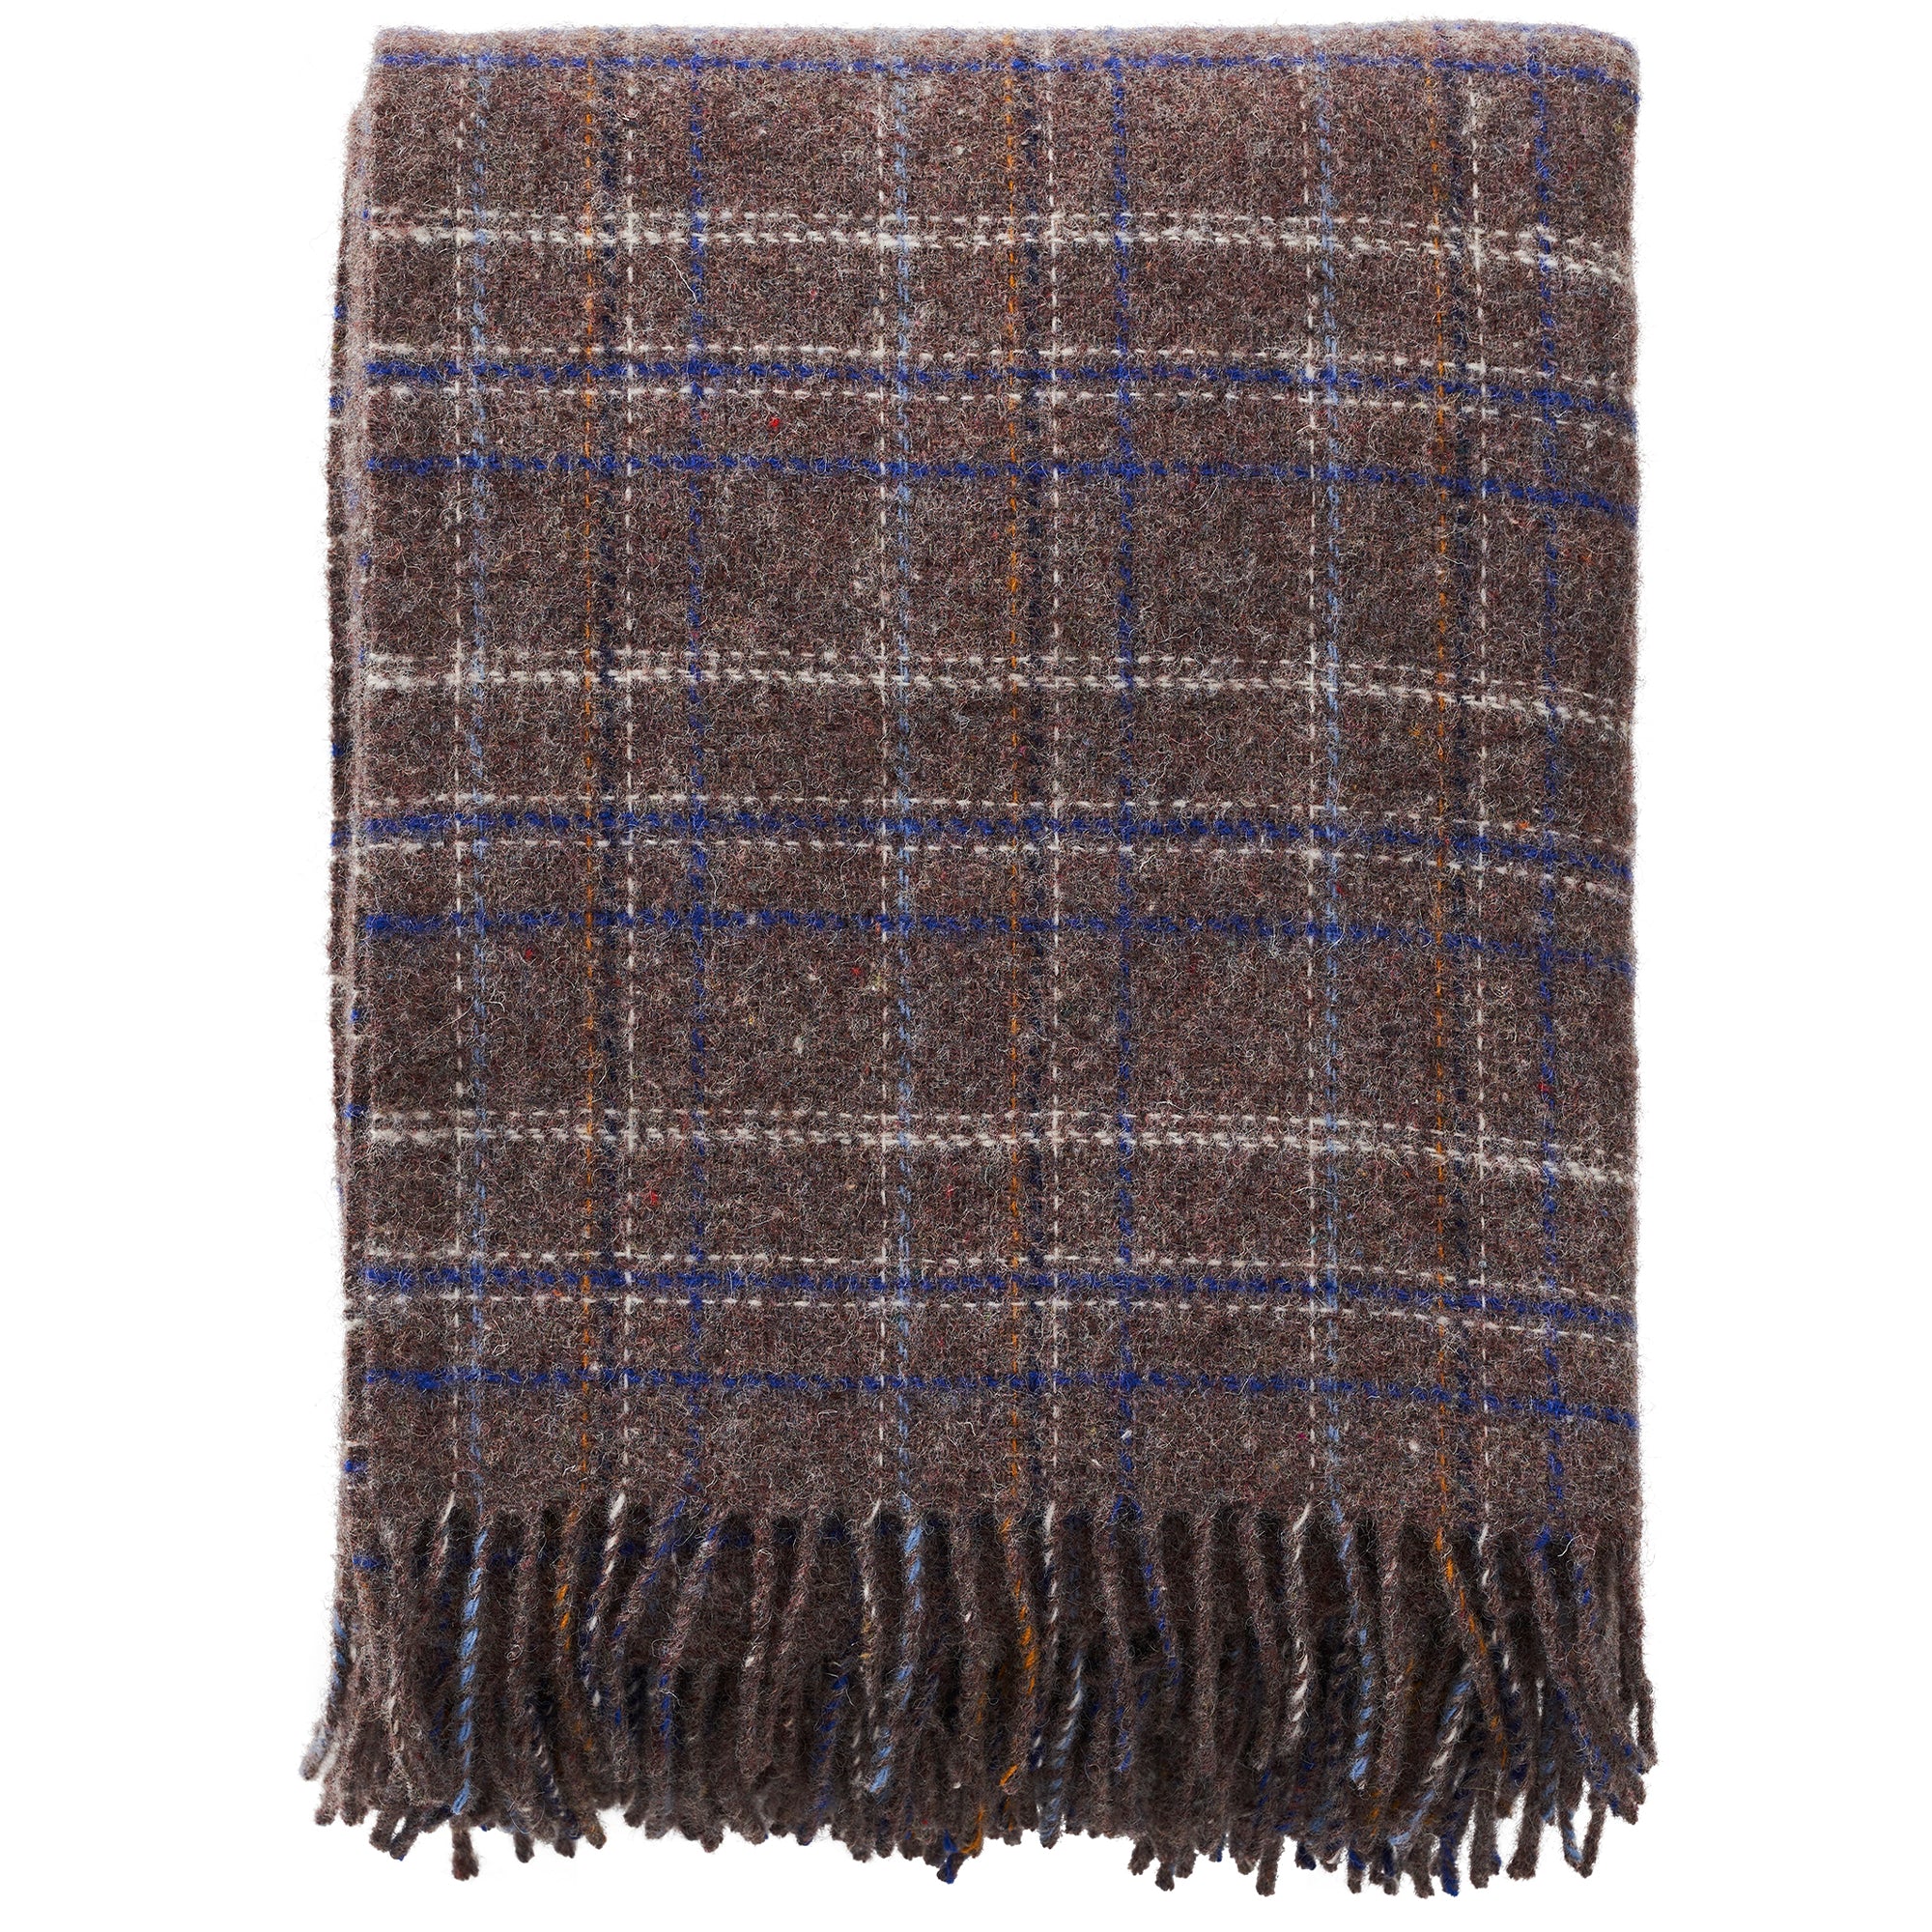 Square Brown/Blue 130x200cm Recycled Wool Throw